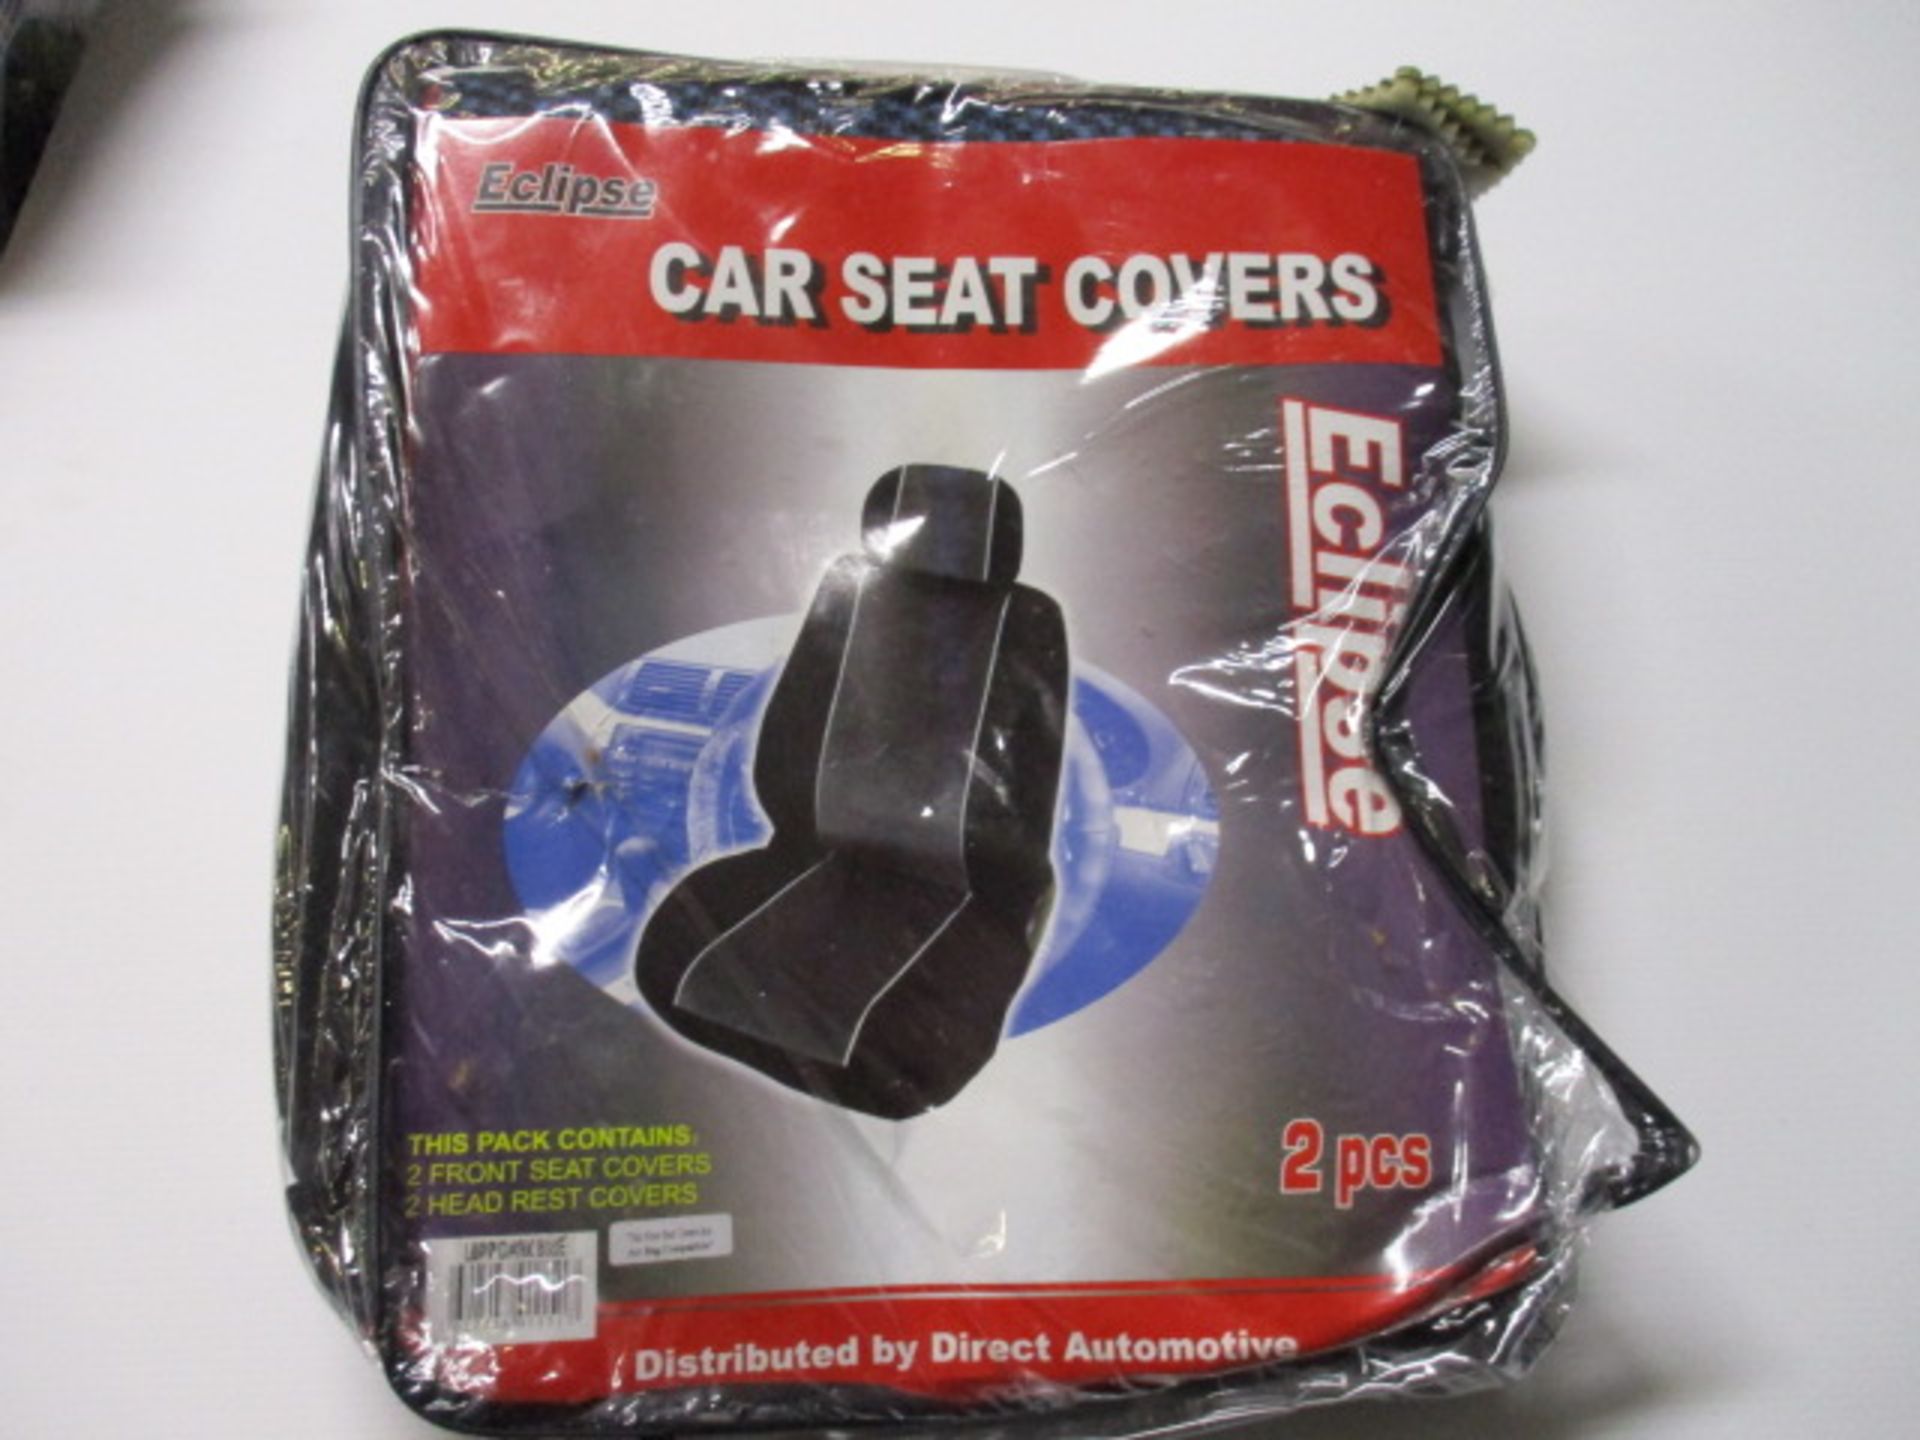 Brand new Eclipse car seat cover set